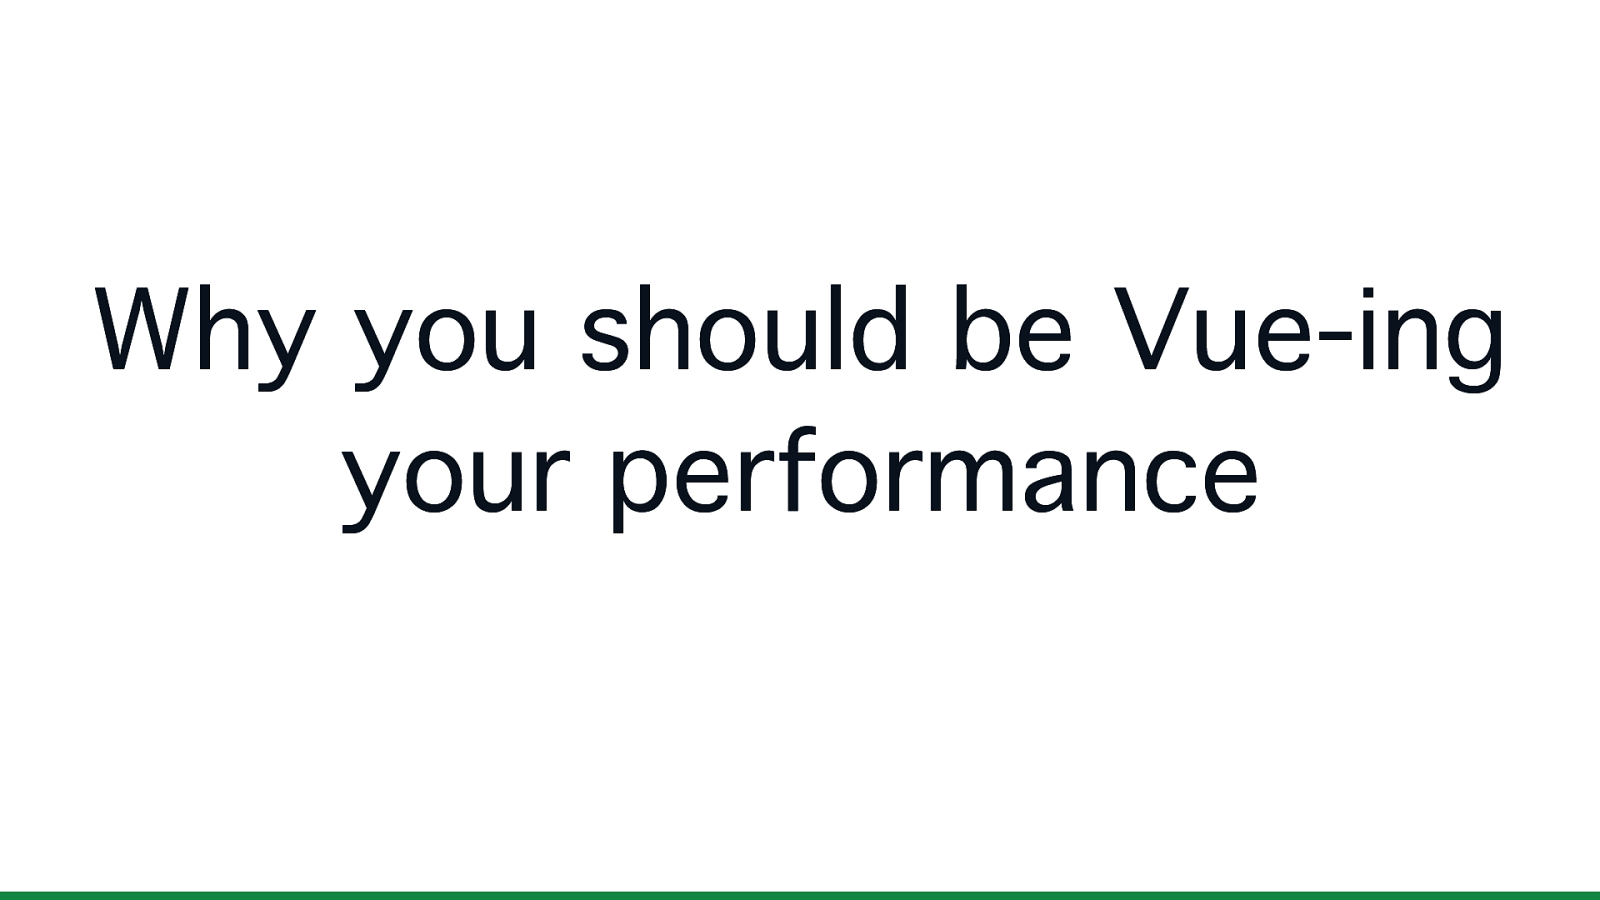 Why you should be vue-ing your performance